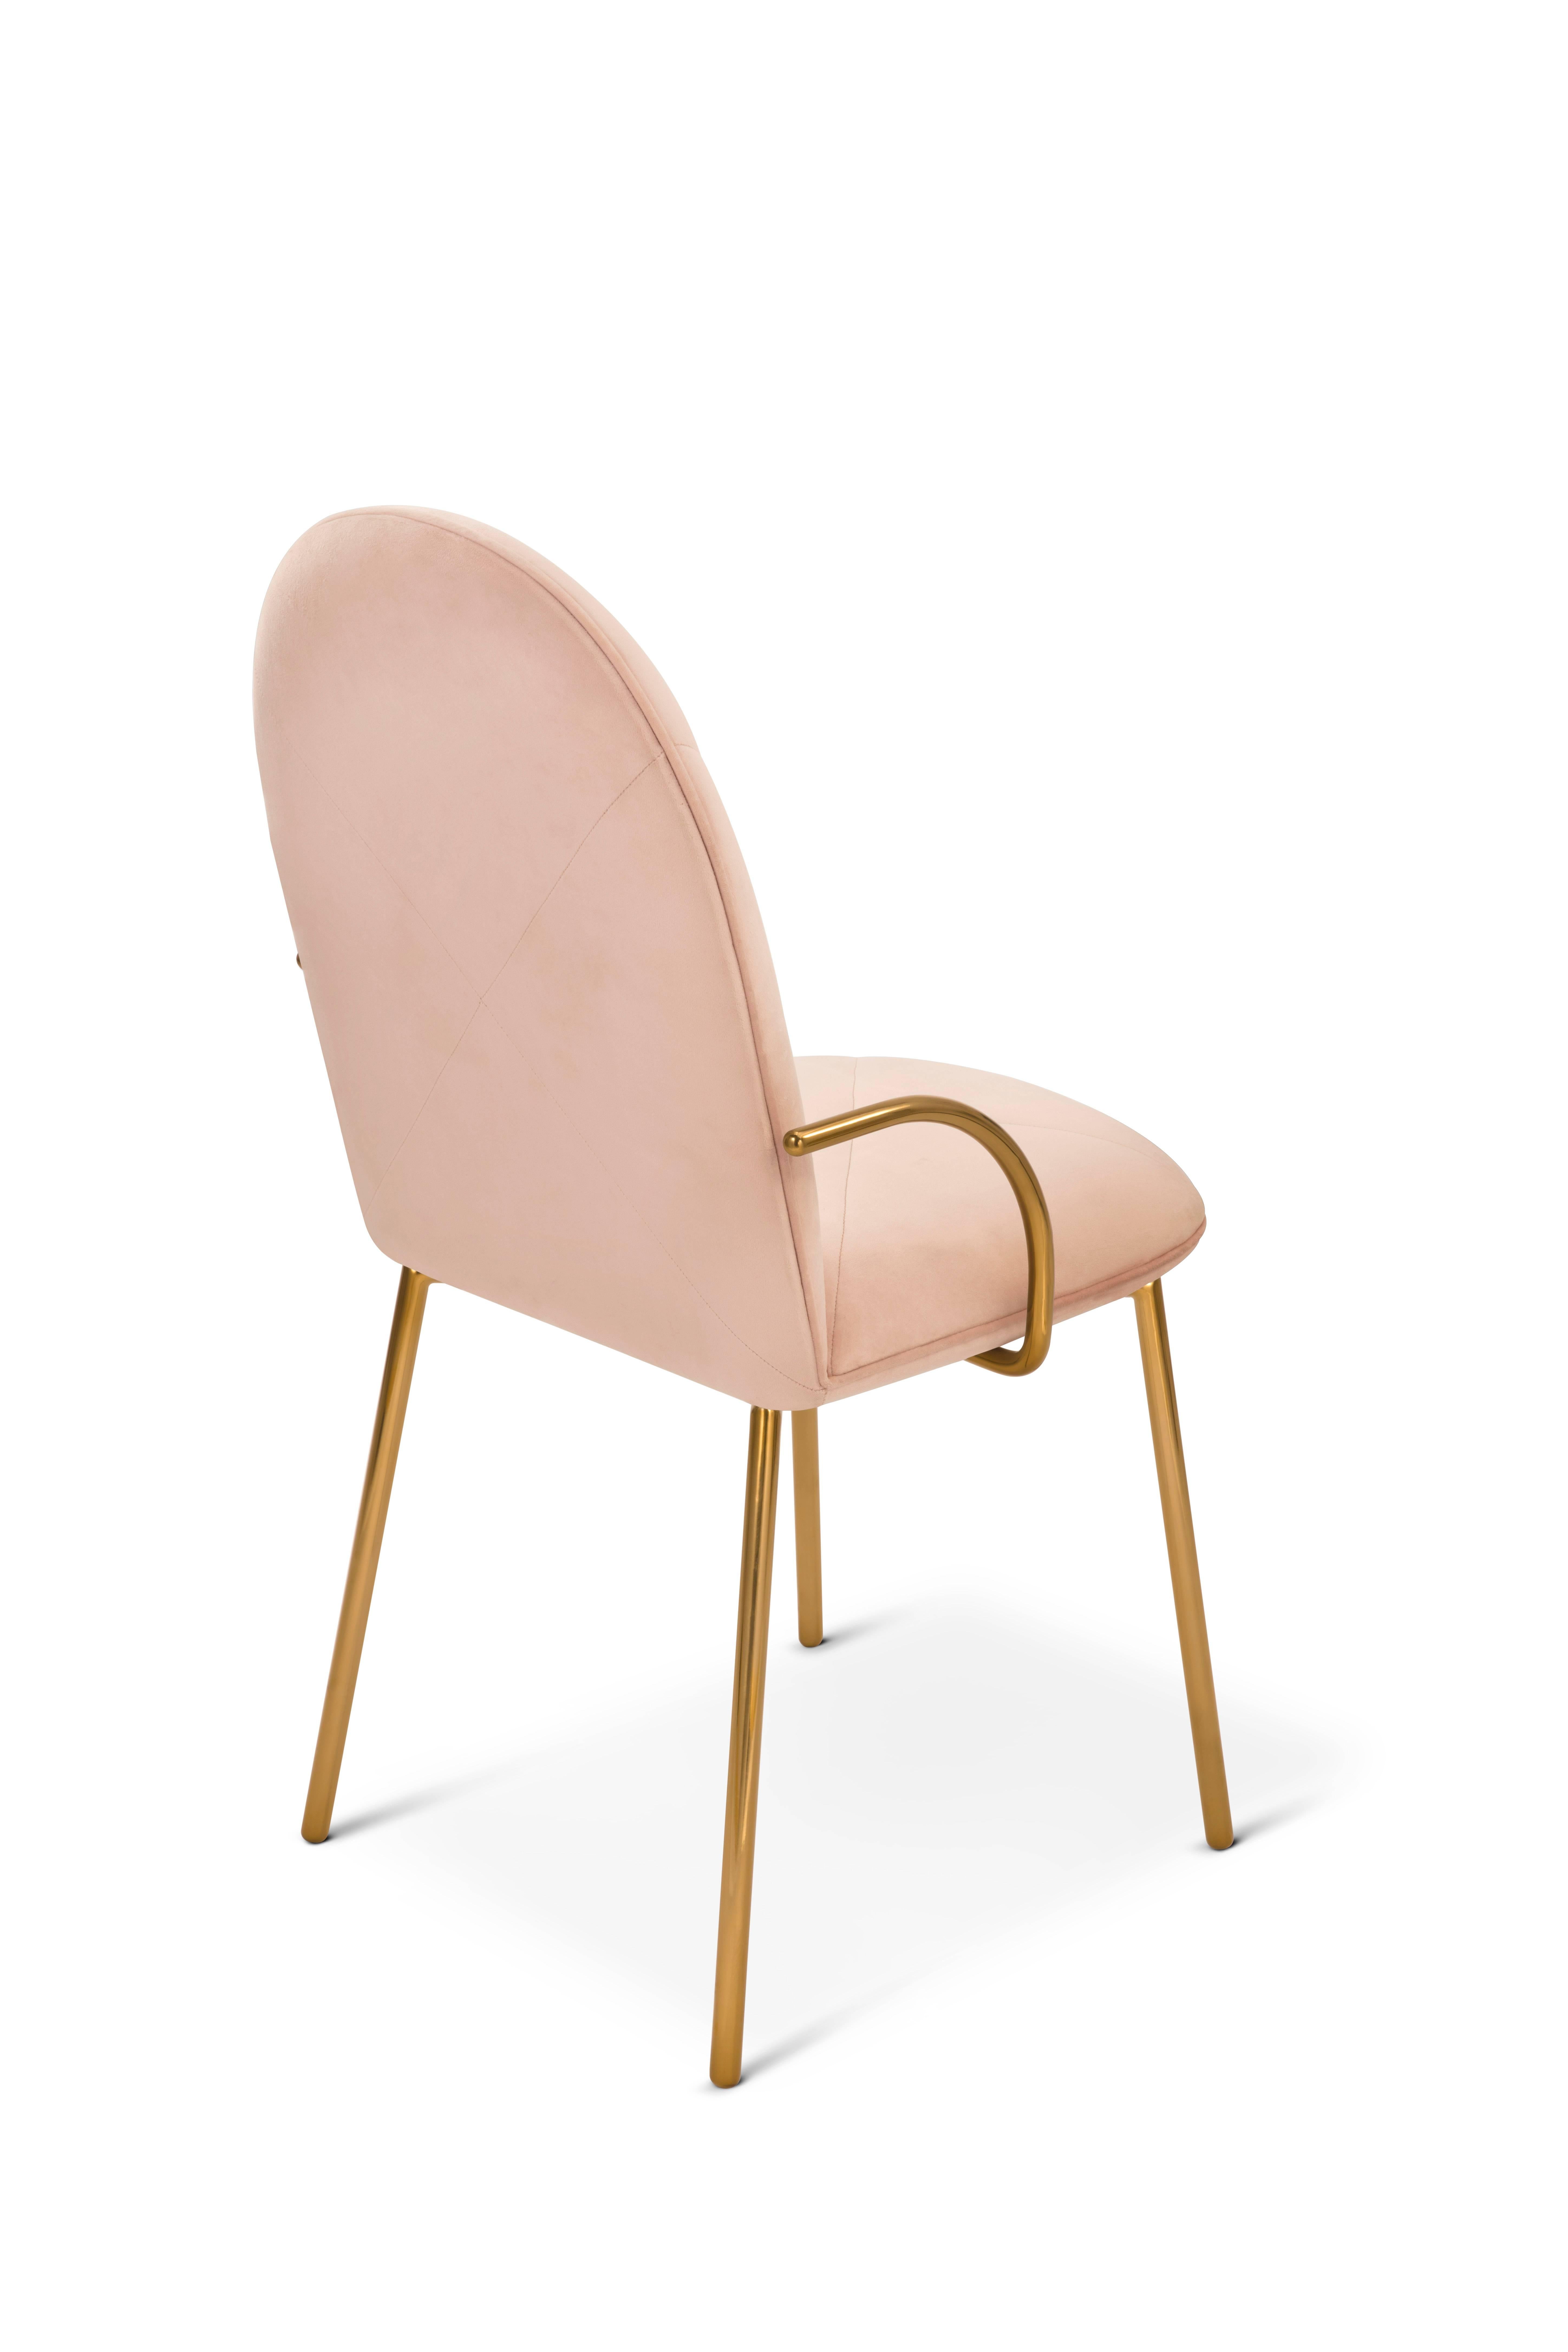 Gold Orion Chair Blush Rose by Nika Zupanc for Scarlet Splendour For Sale